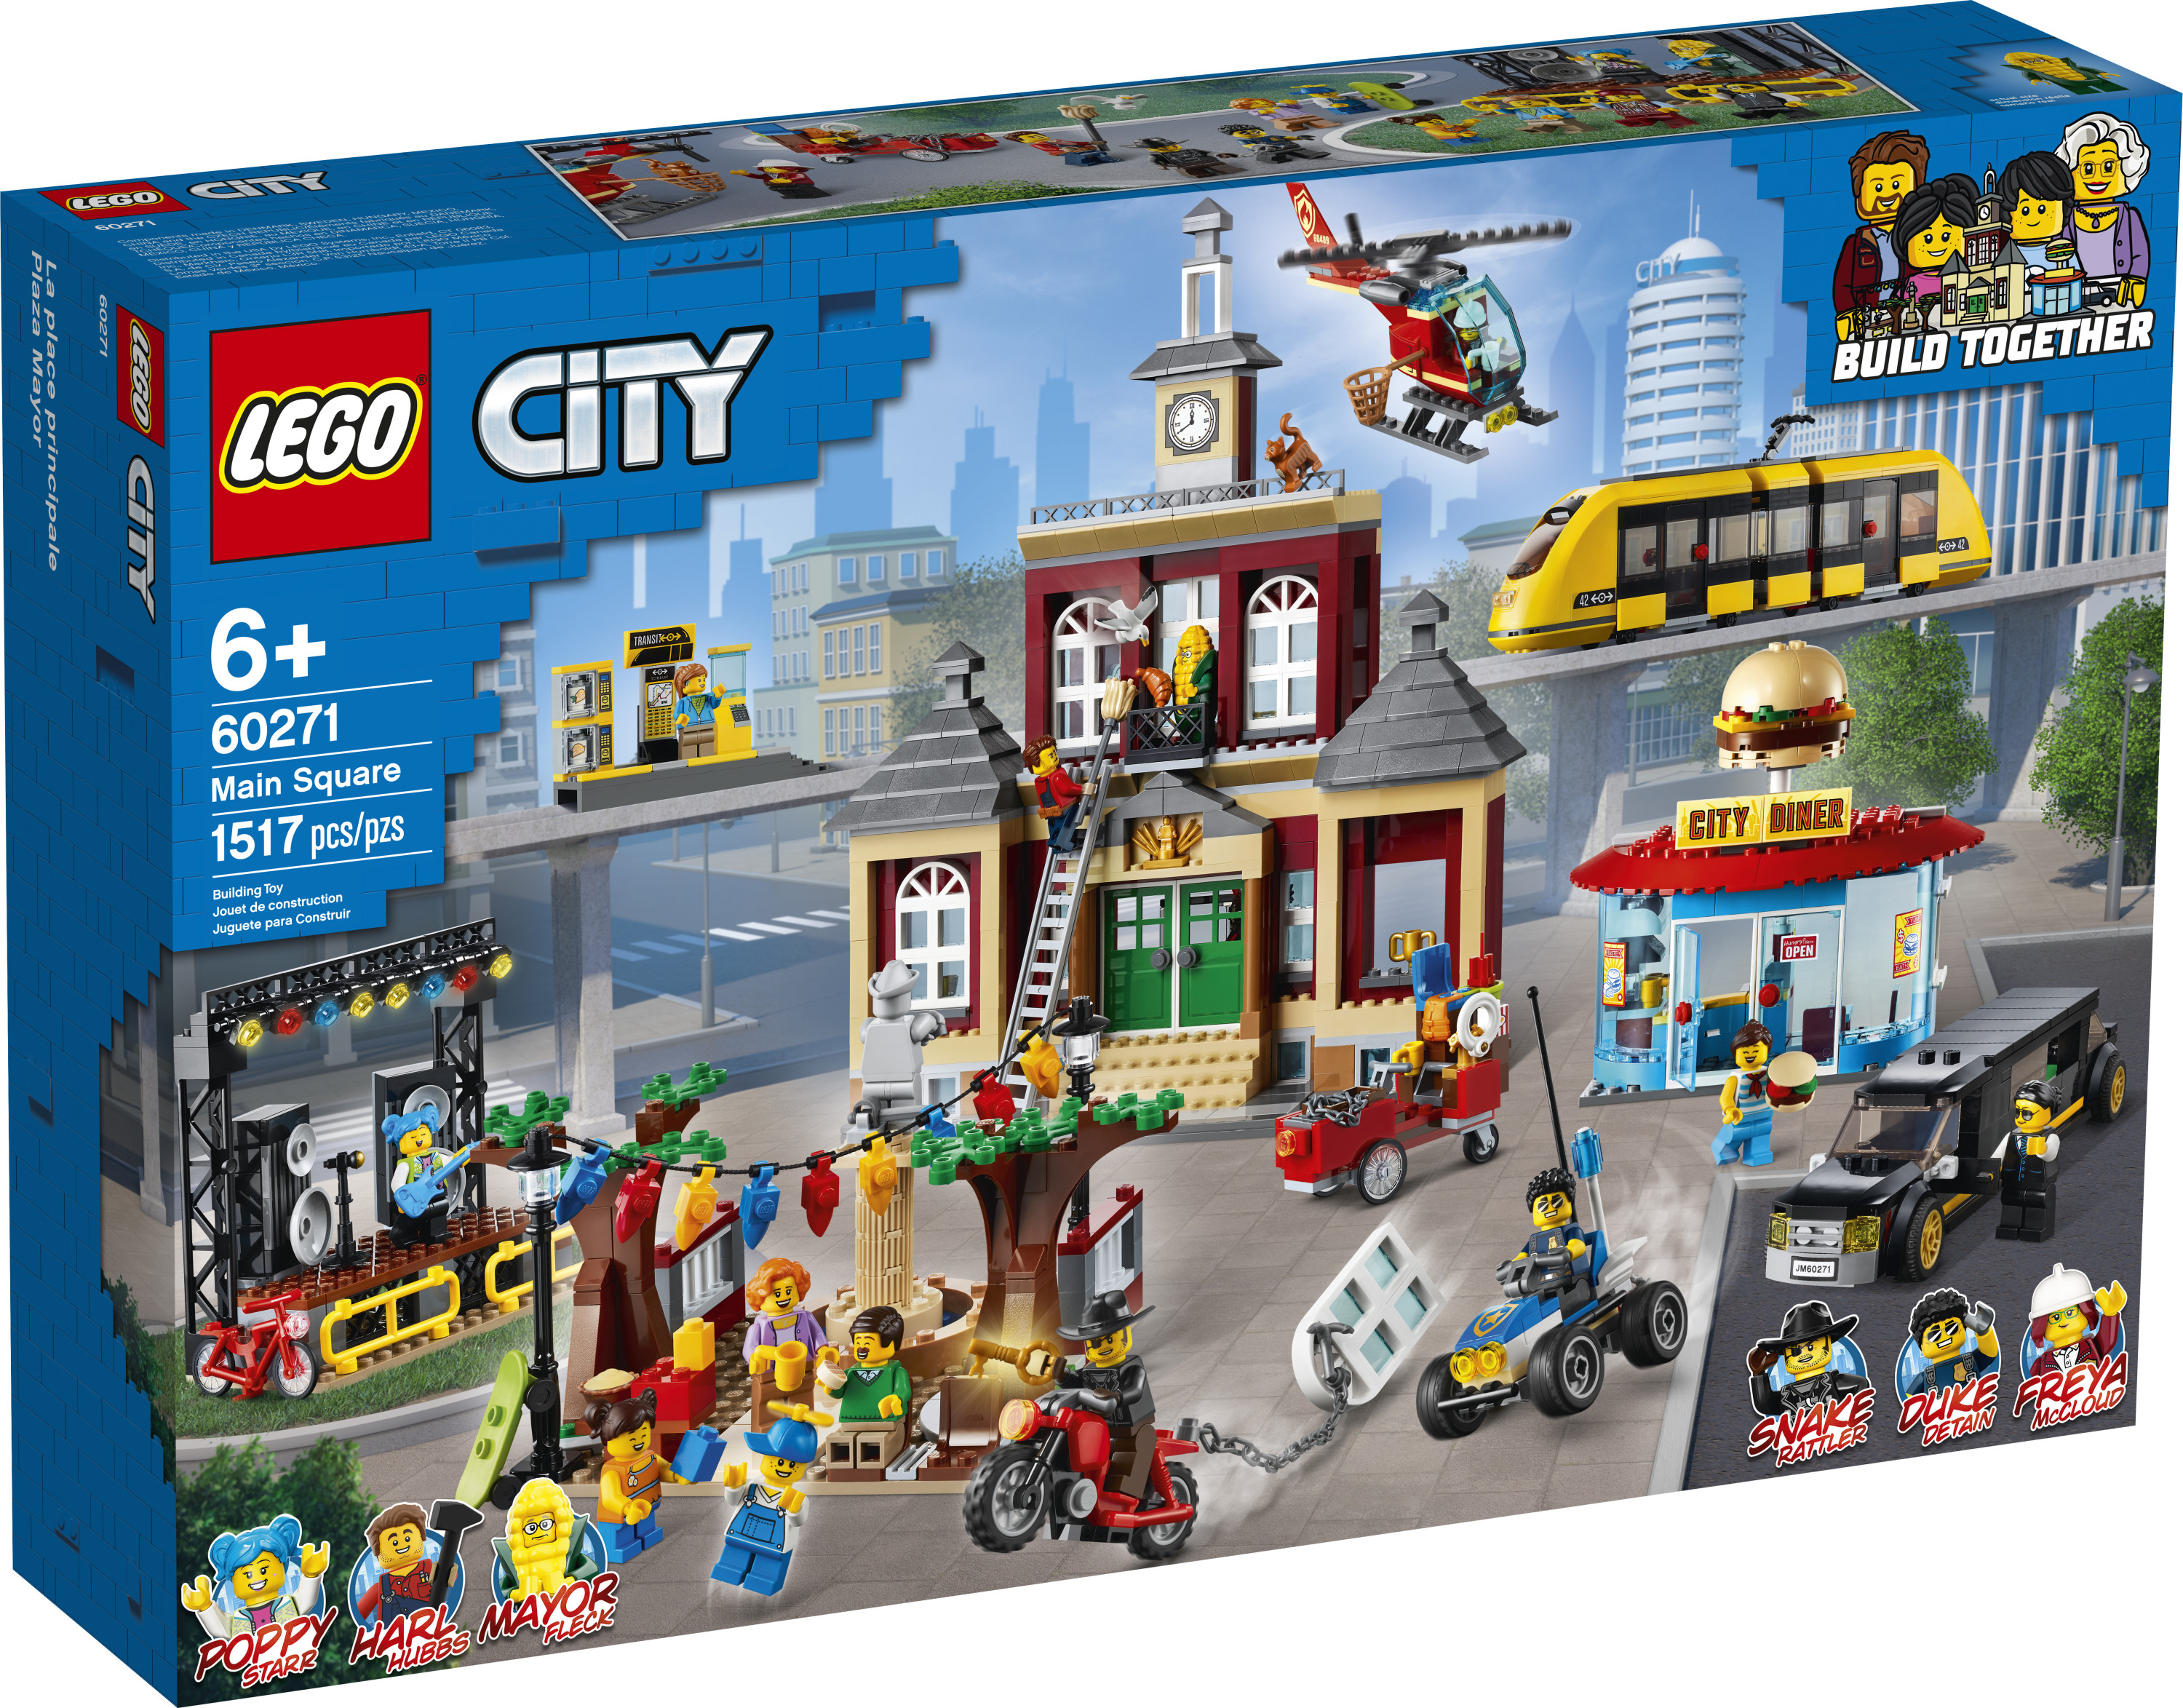 LEGO City Main Square 60271 Cool Building Toy for Kids (1,517 Pieces) - image 5 of 7